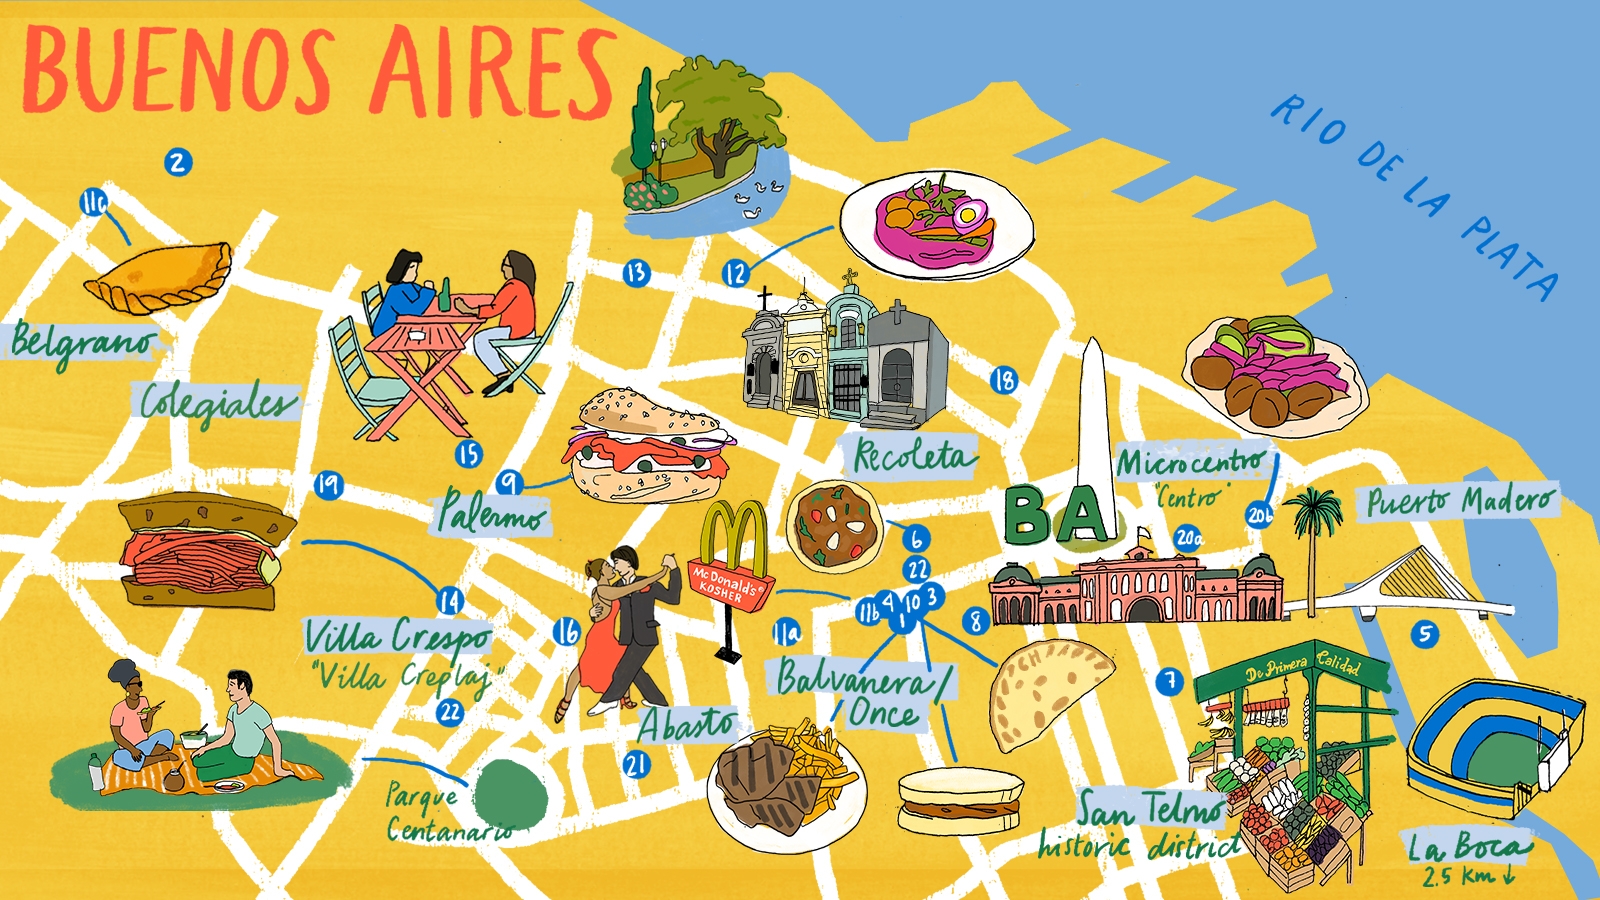 Where to Eat in Buenos Aires - Guide & Map of the Best Restaurants